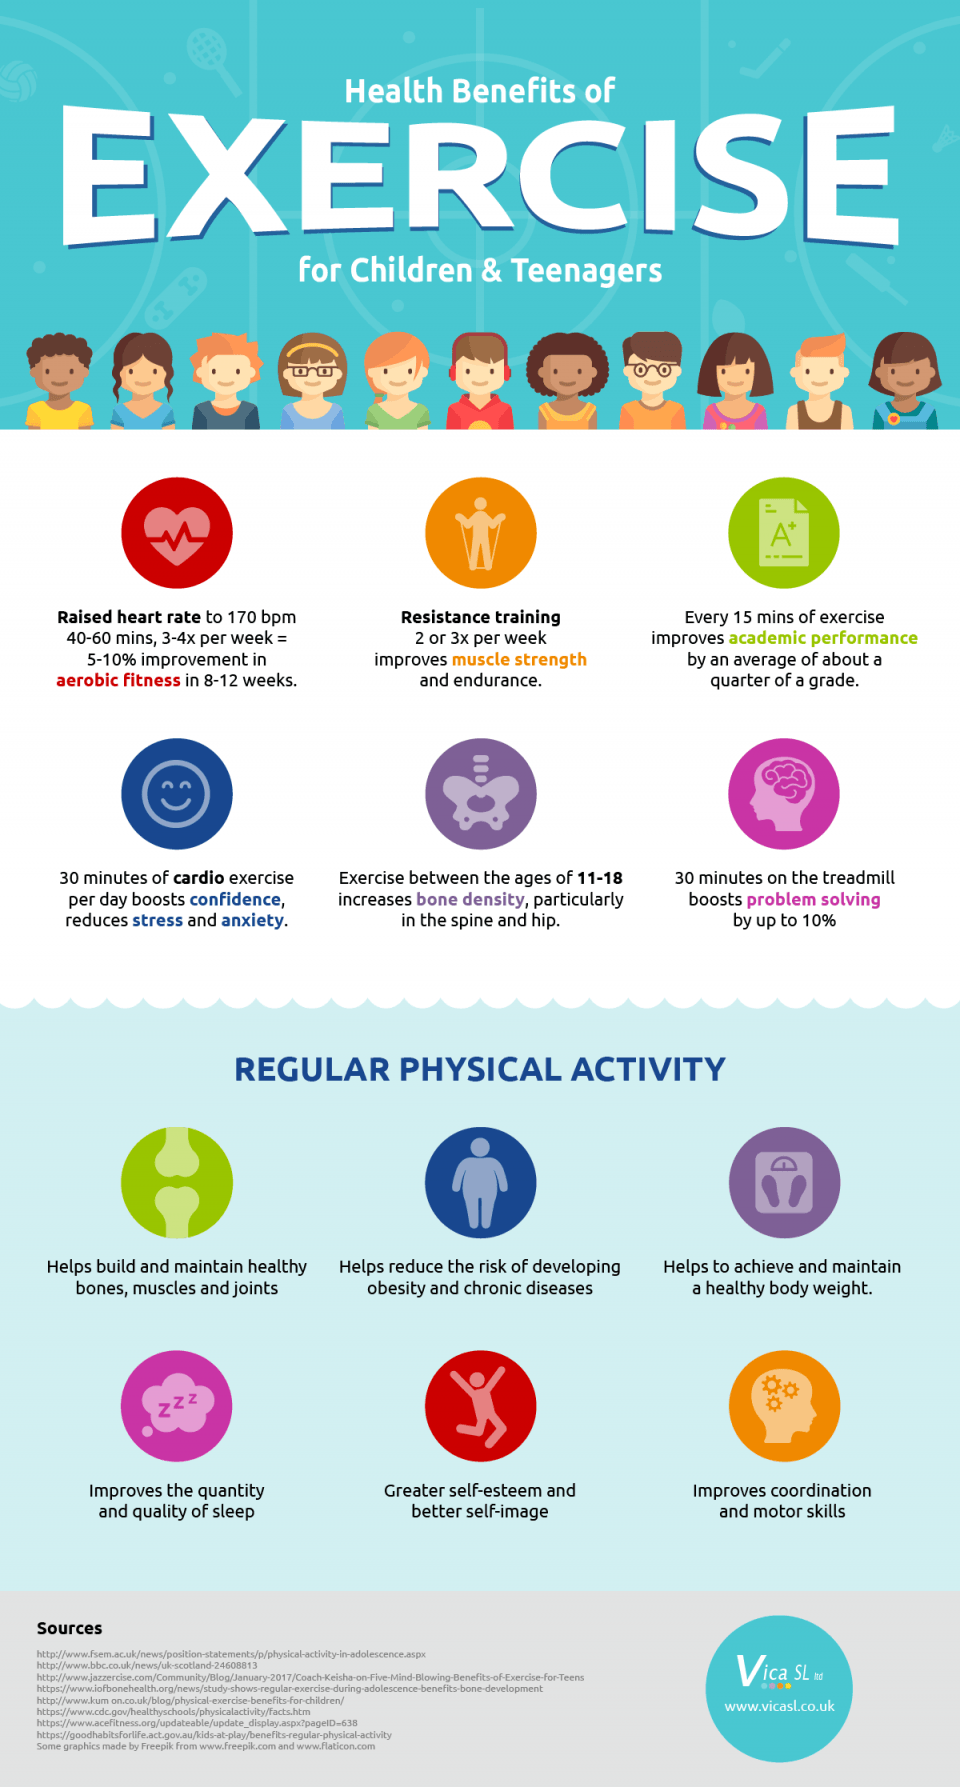 ﻿The Benefits Of Exercise for Children Infographic